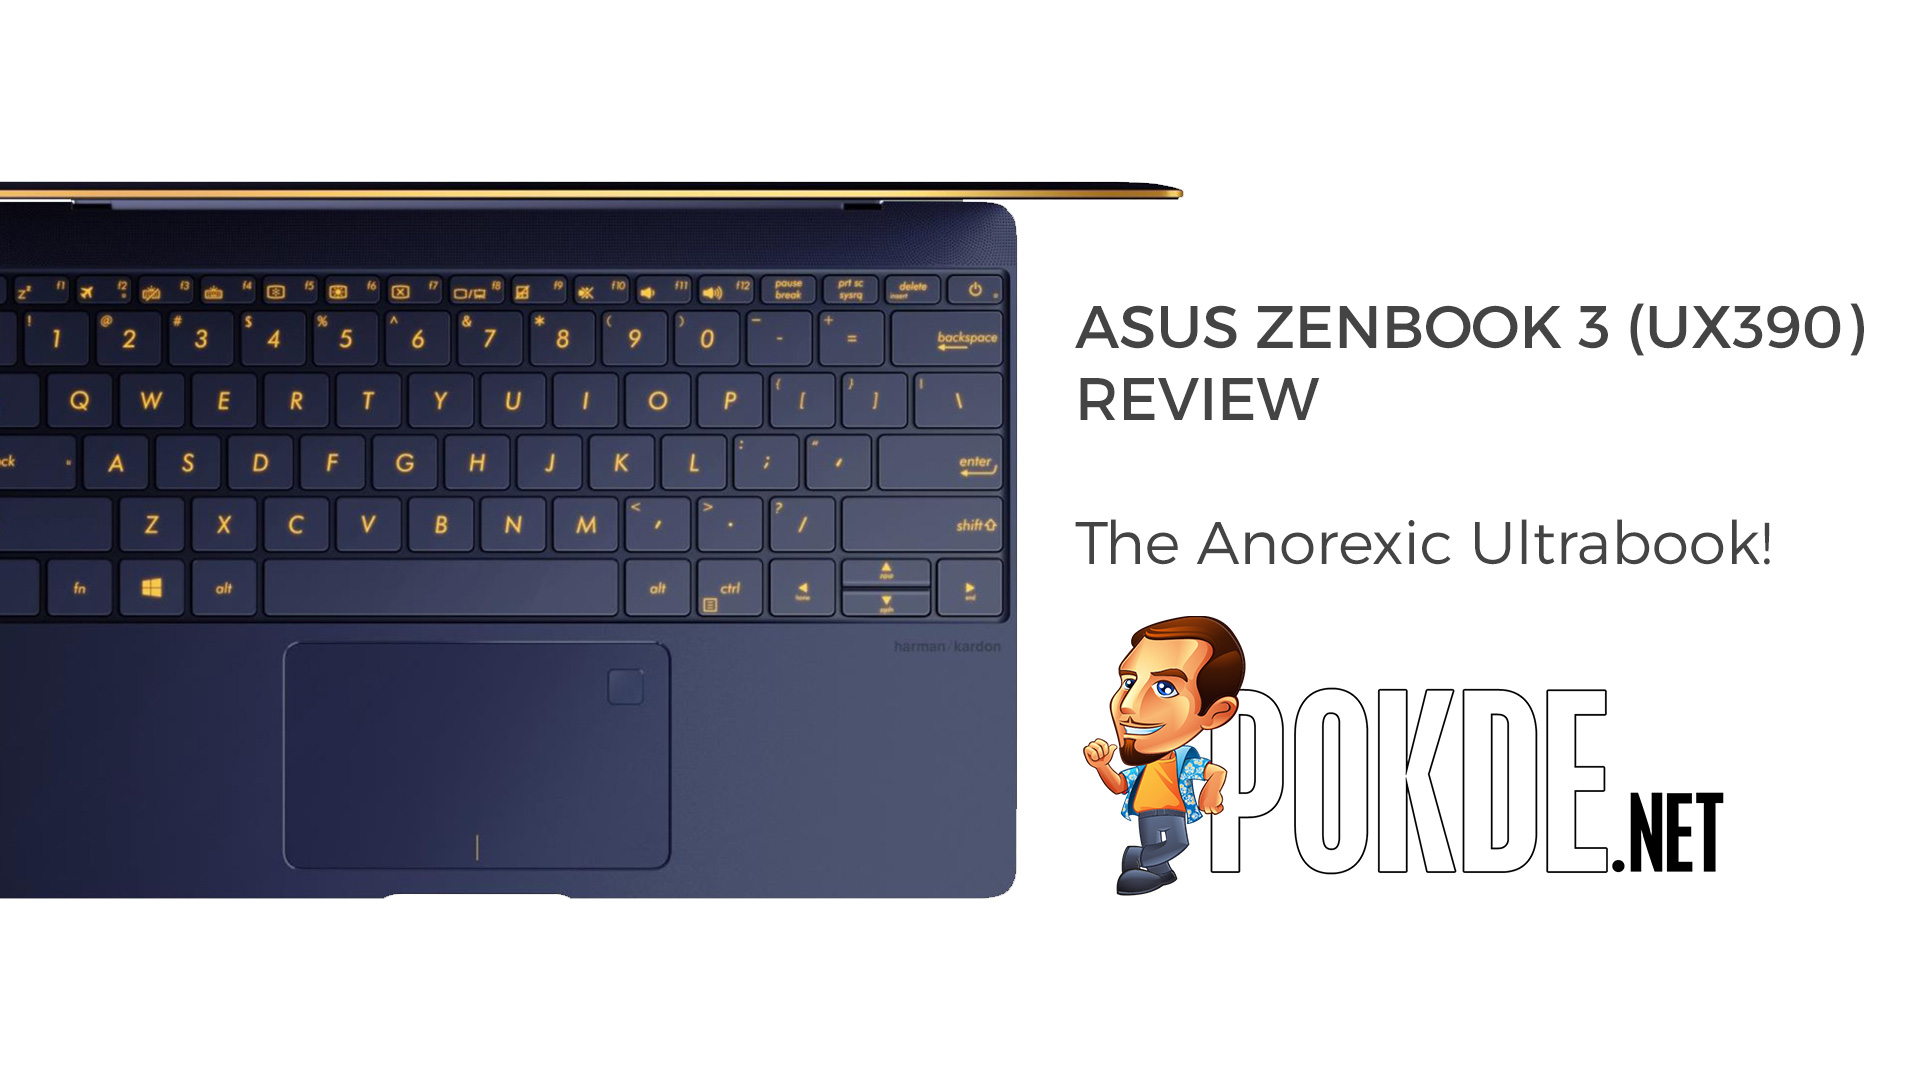 Asus ZenBook 3 (UX390) Review - The Anorexic Ultrabook 28